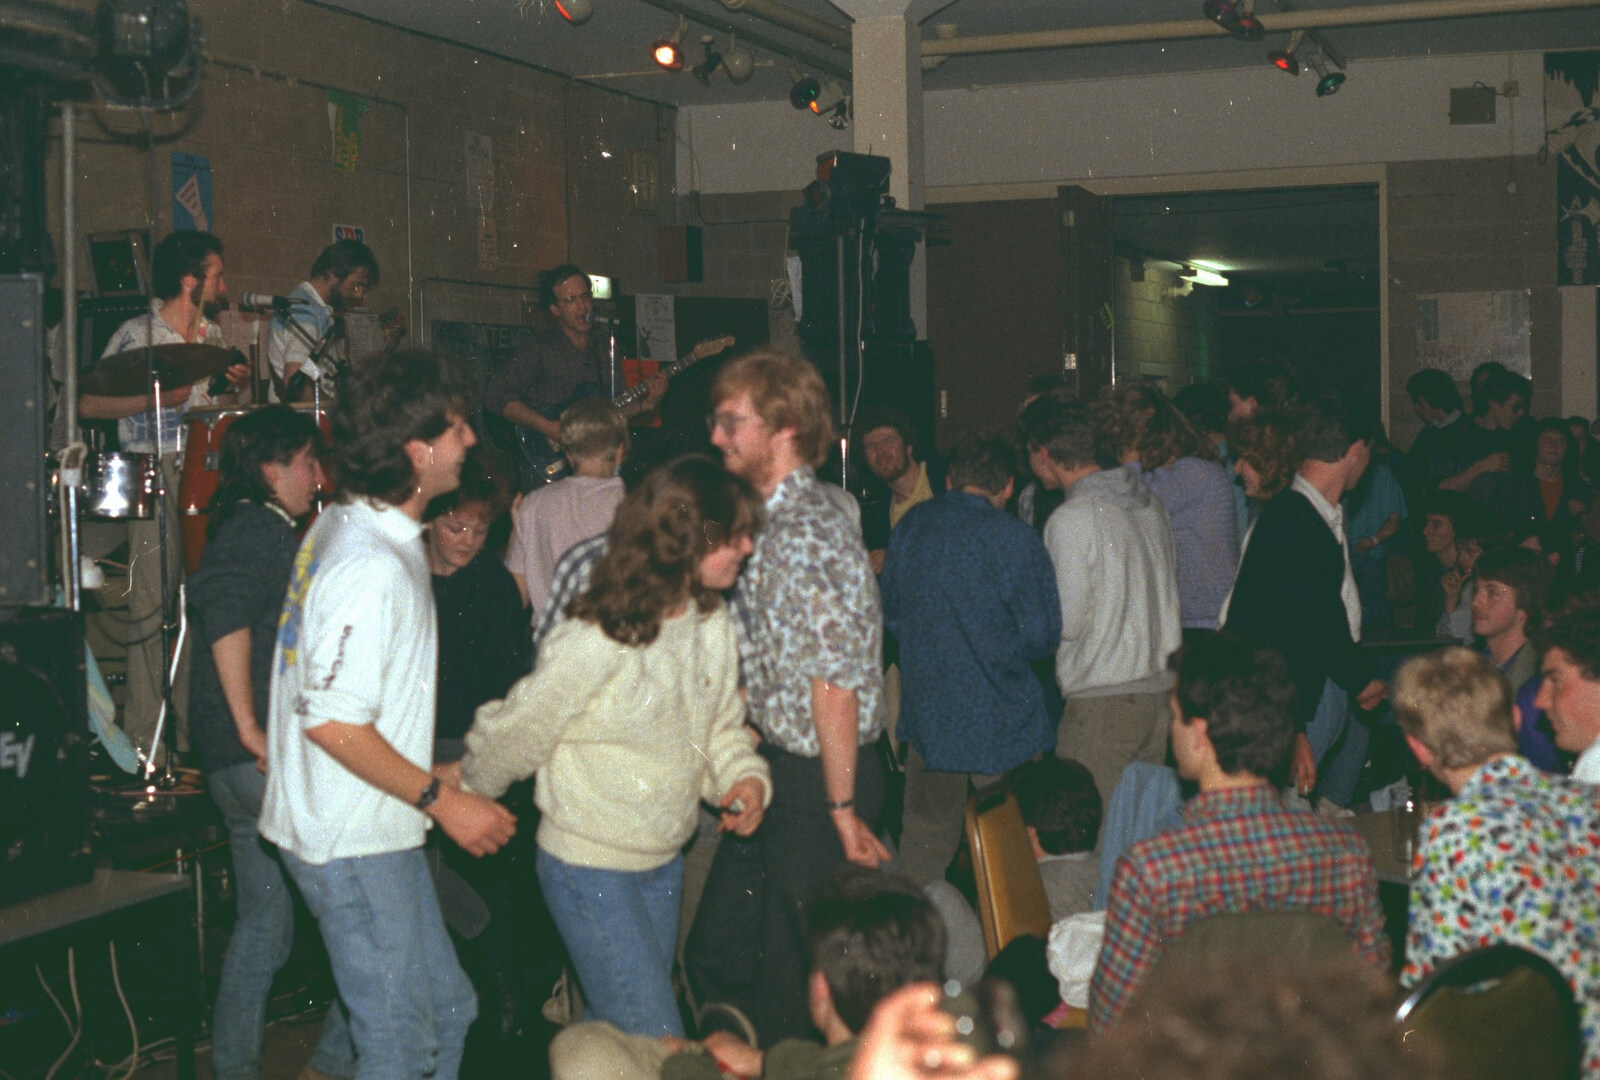 There's some dancing in the Students' Union from Uni: Simon Read's Party, North Road East, Plymouth - 10th October 1986